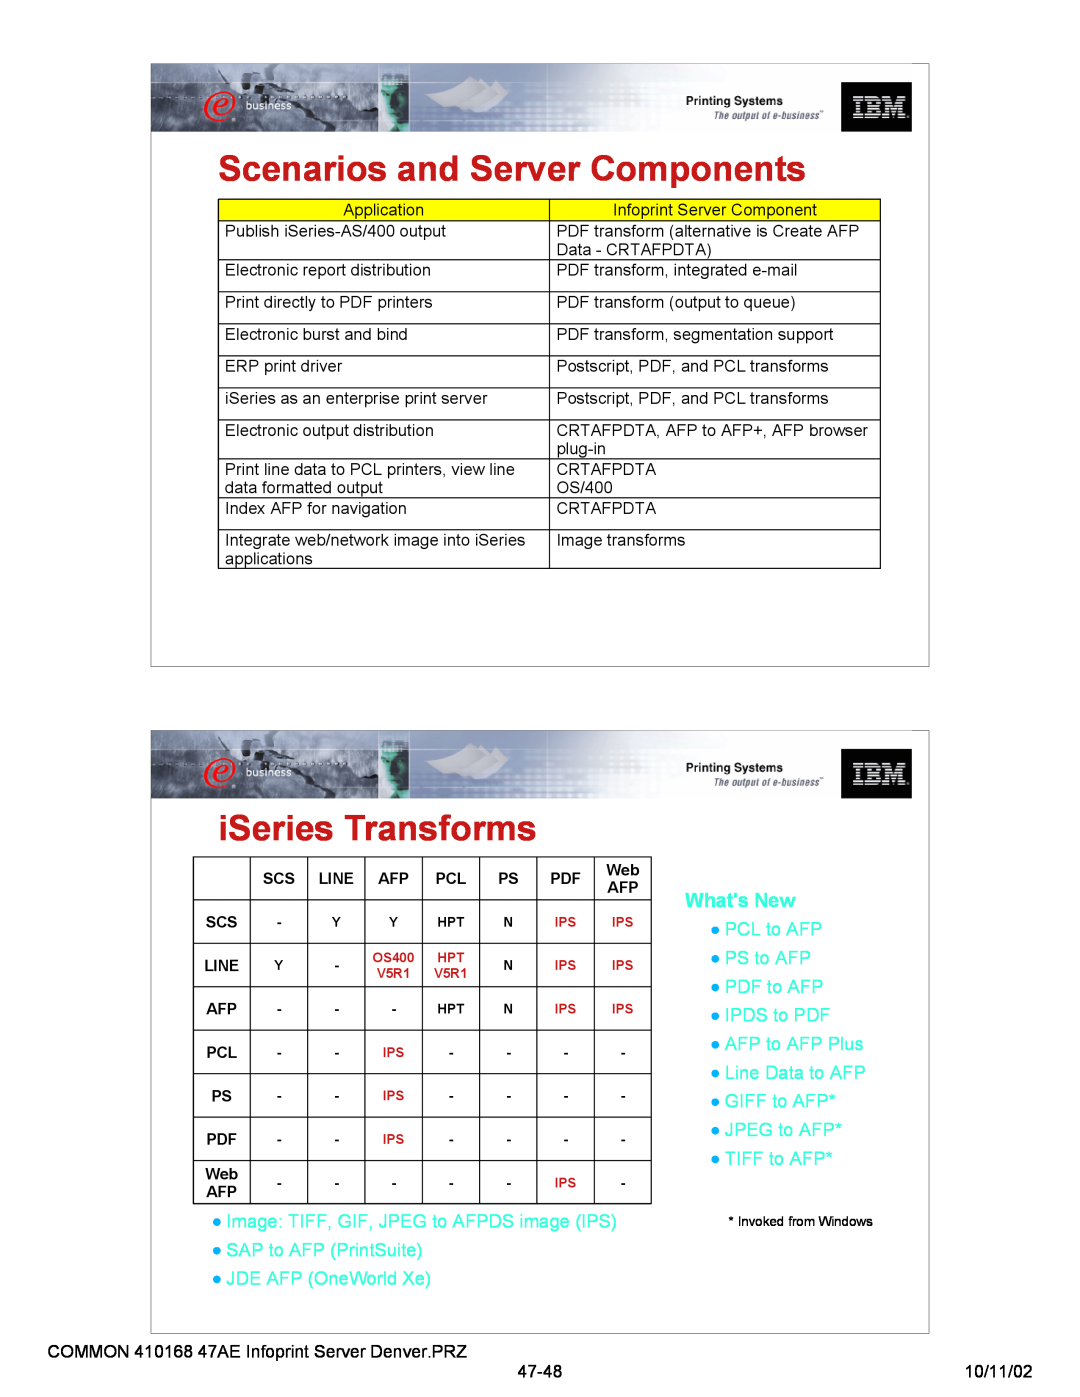 IBM 47AE - 410168 manual Scenarios and Server Components, iSeries Transforms, Whats New, PCL to AFP, PS to AFP, PDF to AFP 